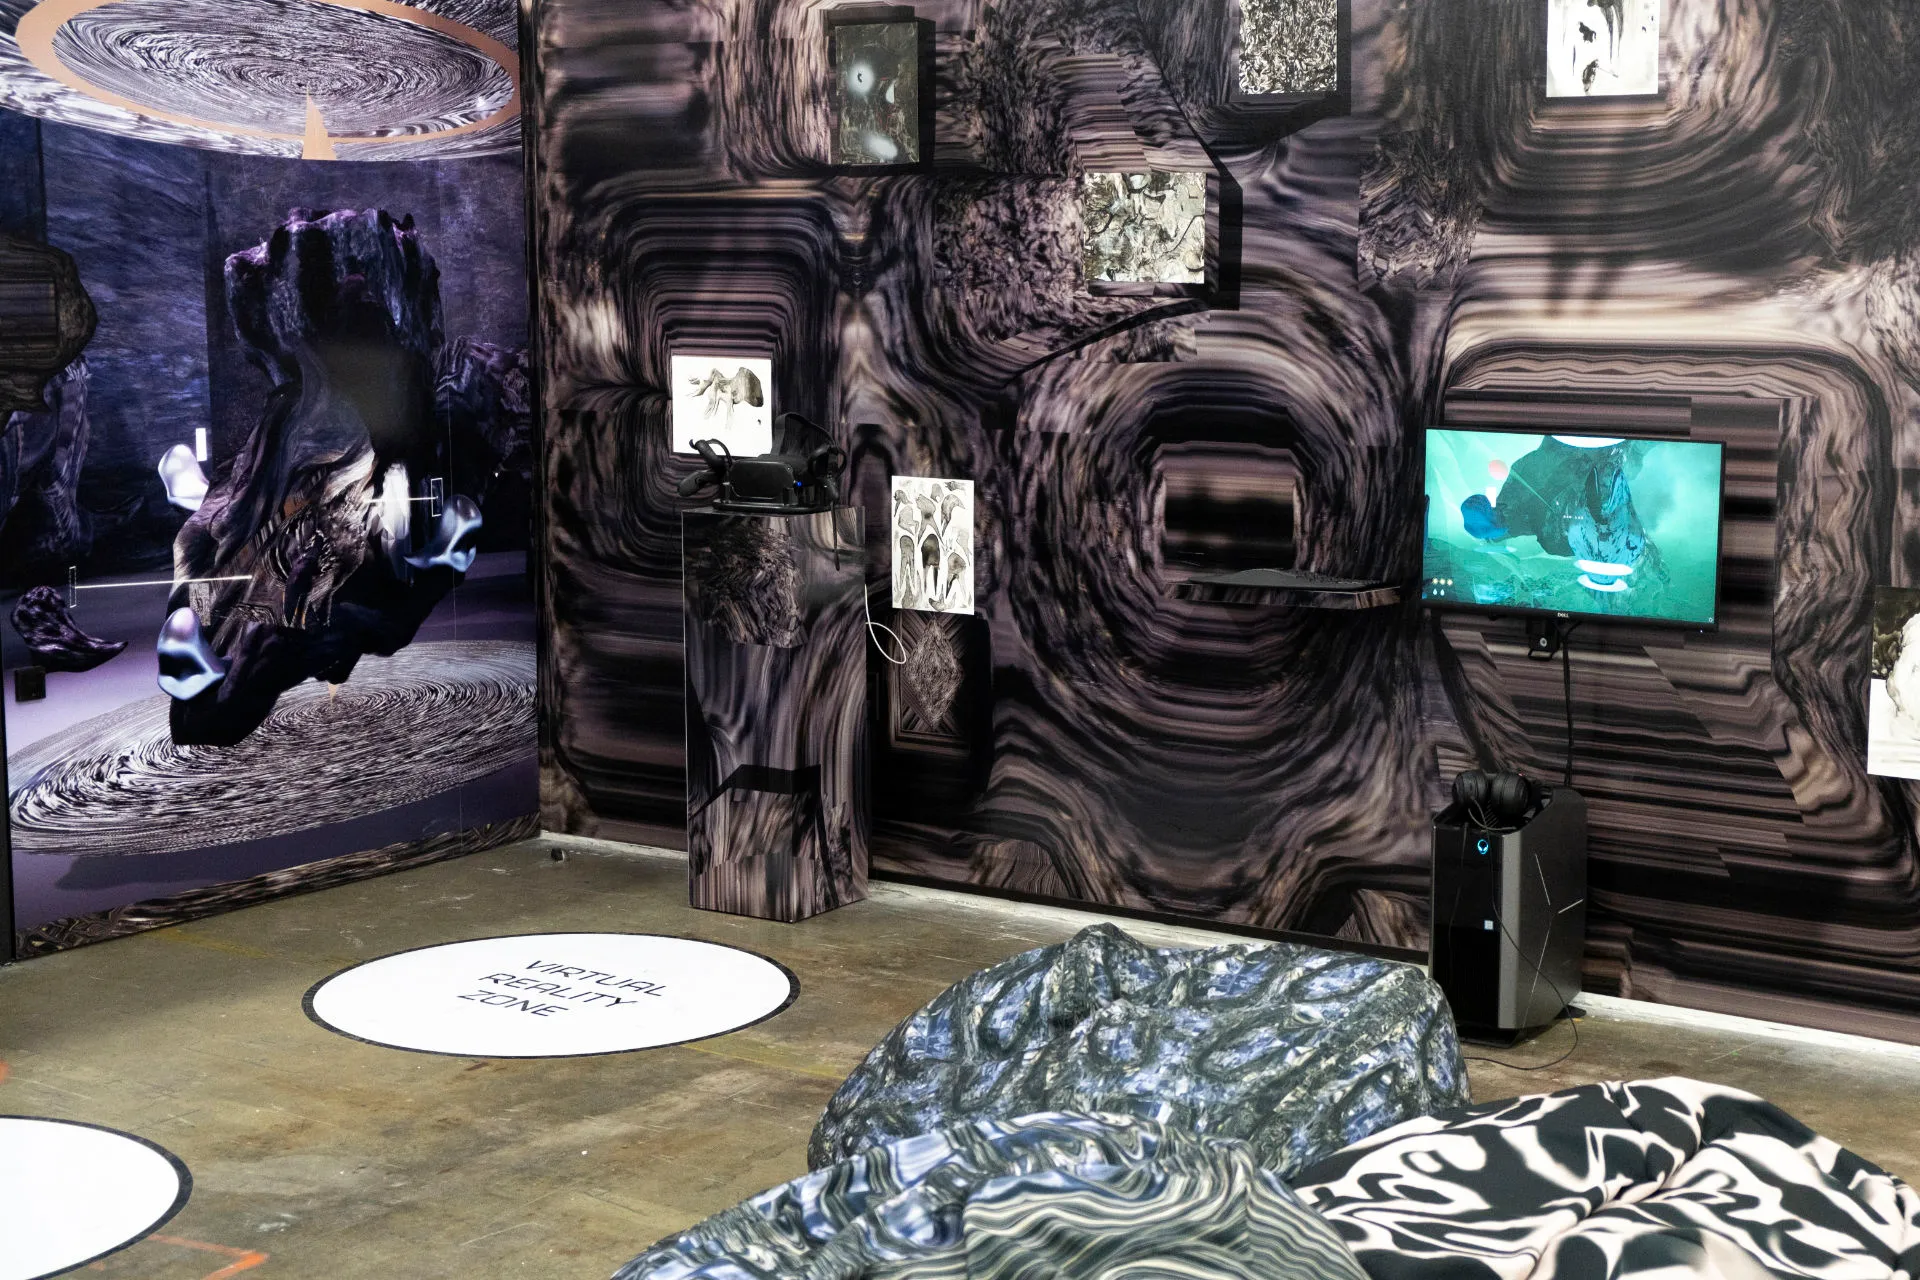 A room with a screen showing the Intensity Testing metaverse scene, with an oculus on a pedestal and wallpaper of the scene on the walls